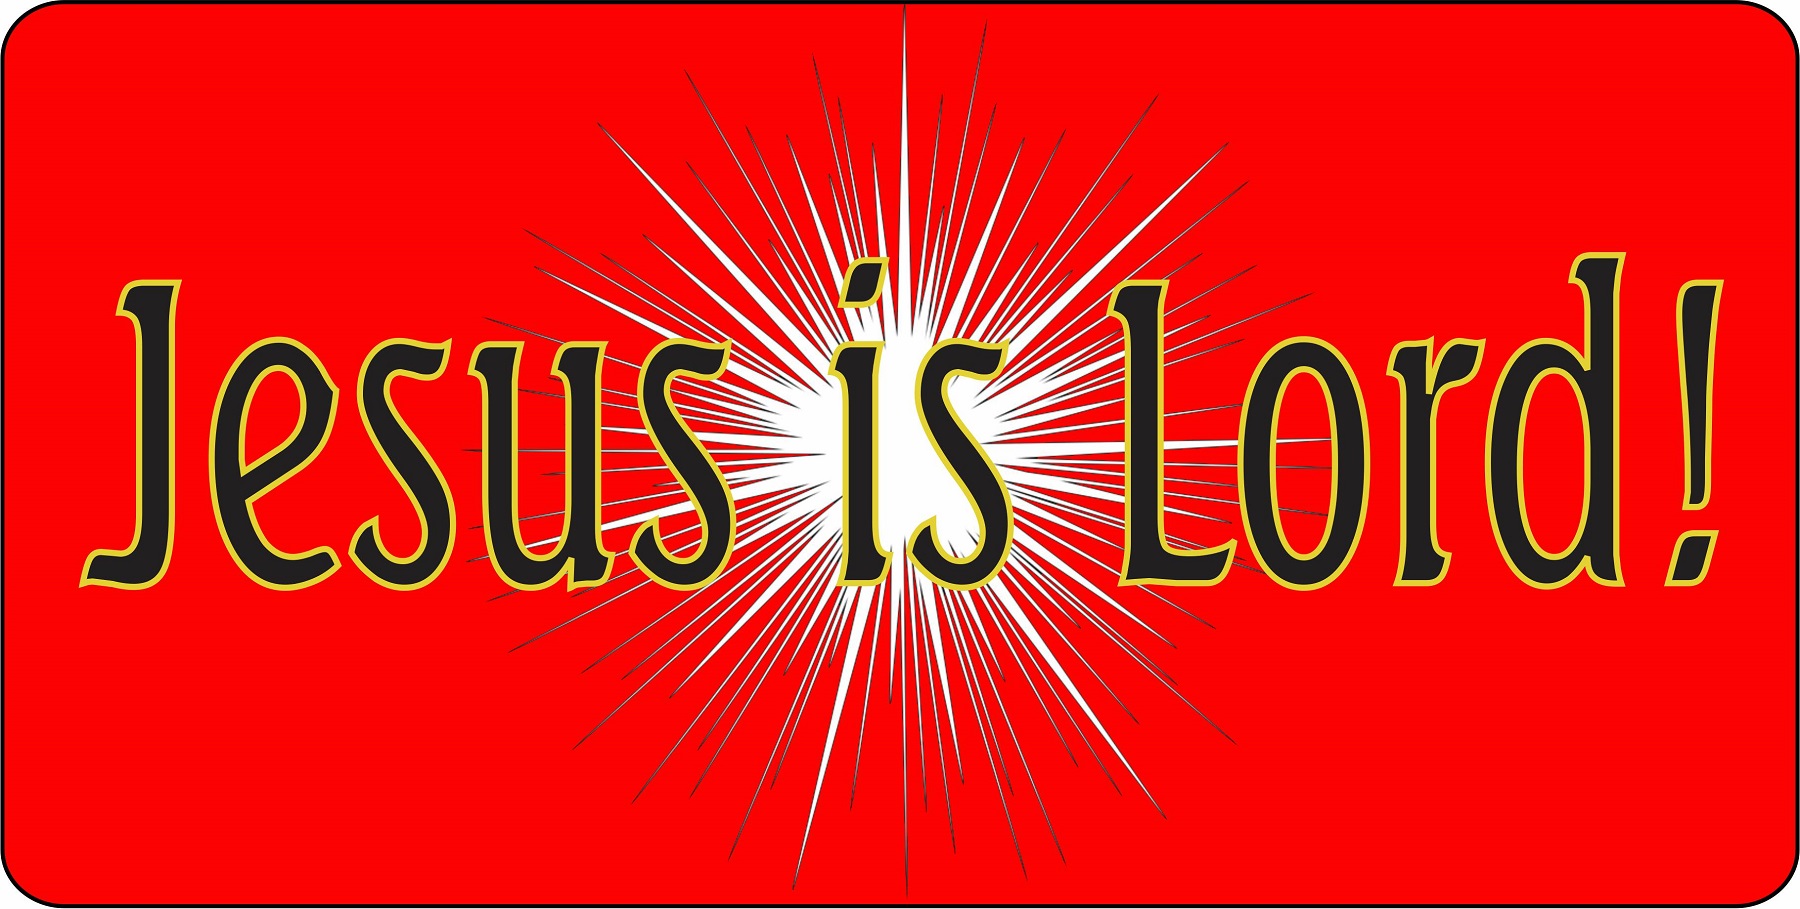 Jesus Is Lord On Red Photo LICENSE PLATE